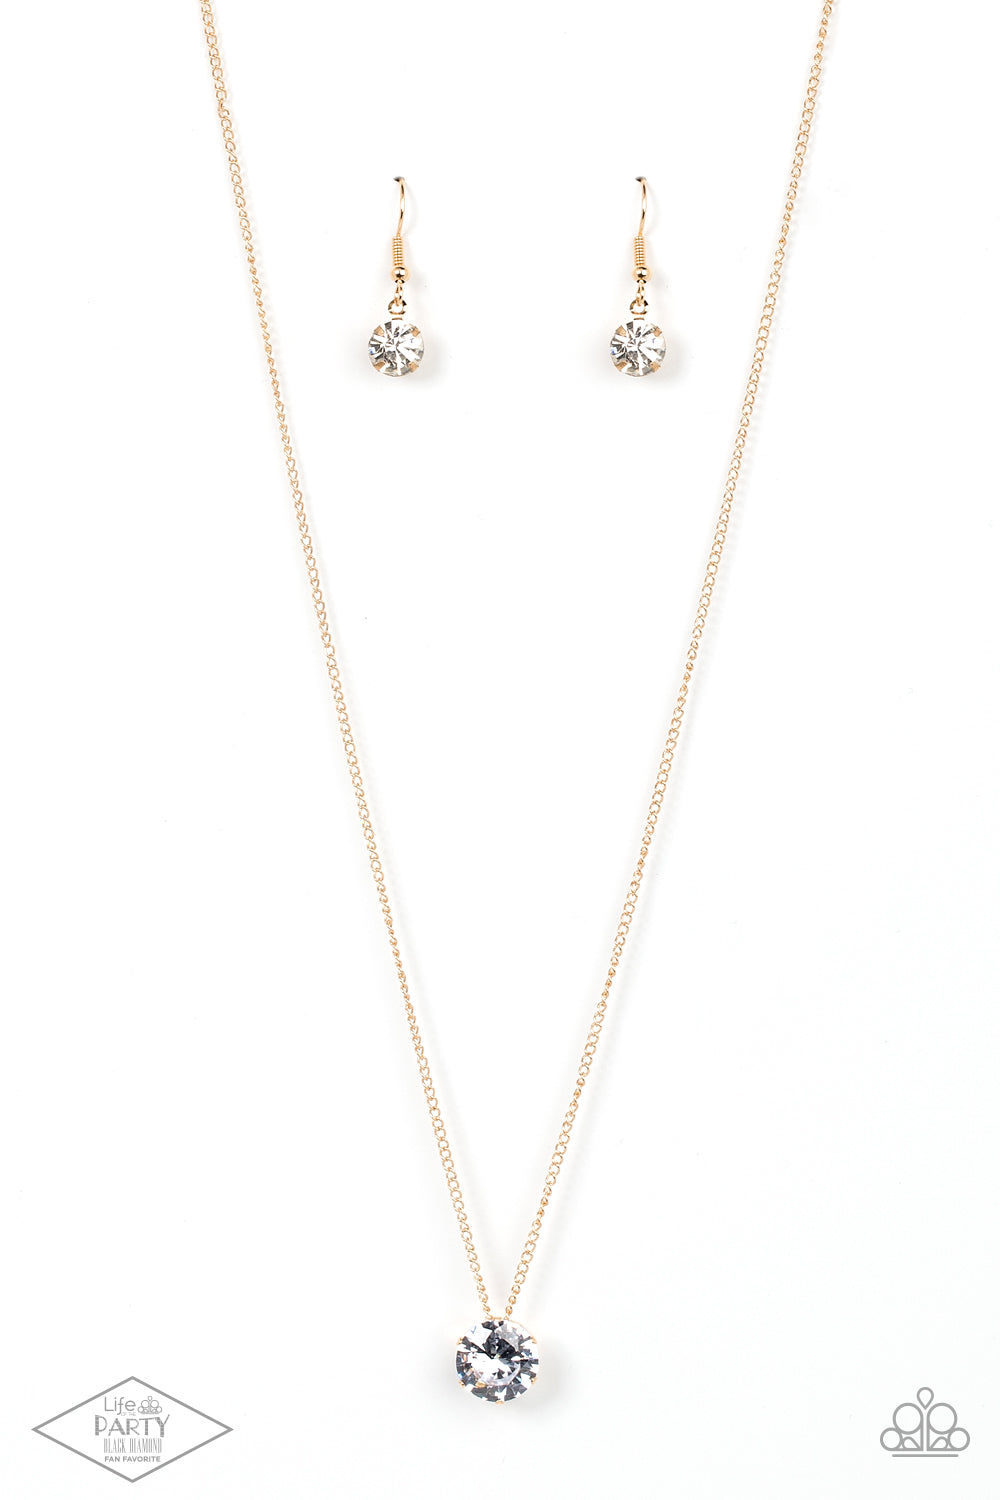 Paparazzi Accessories - What A Gem #N791 - Gold Necklace